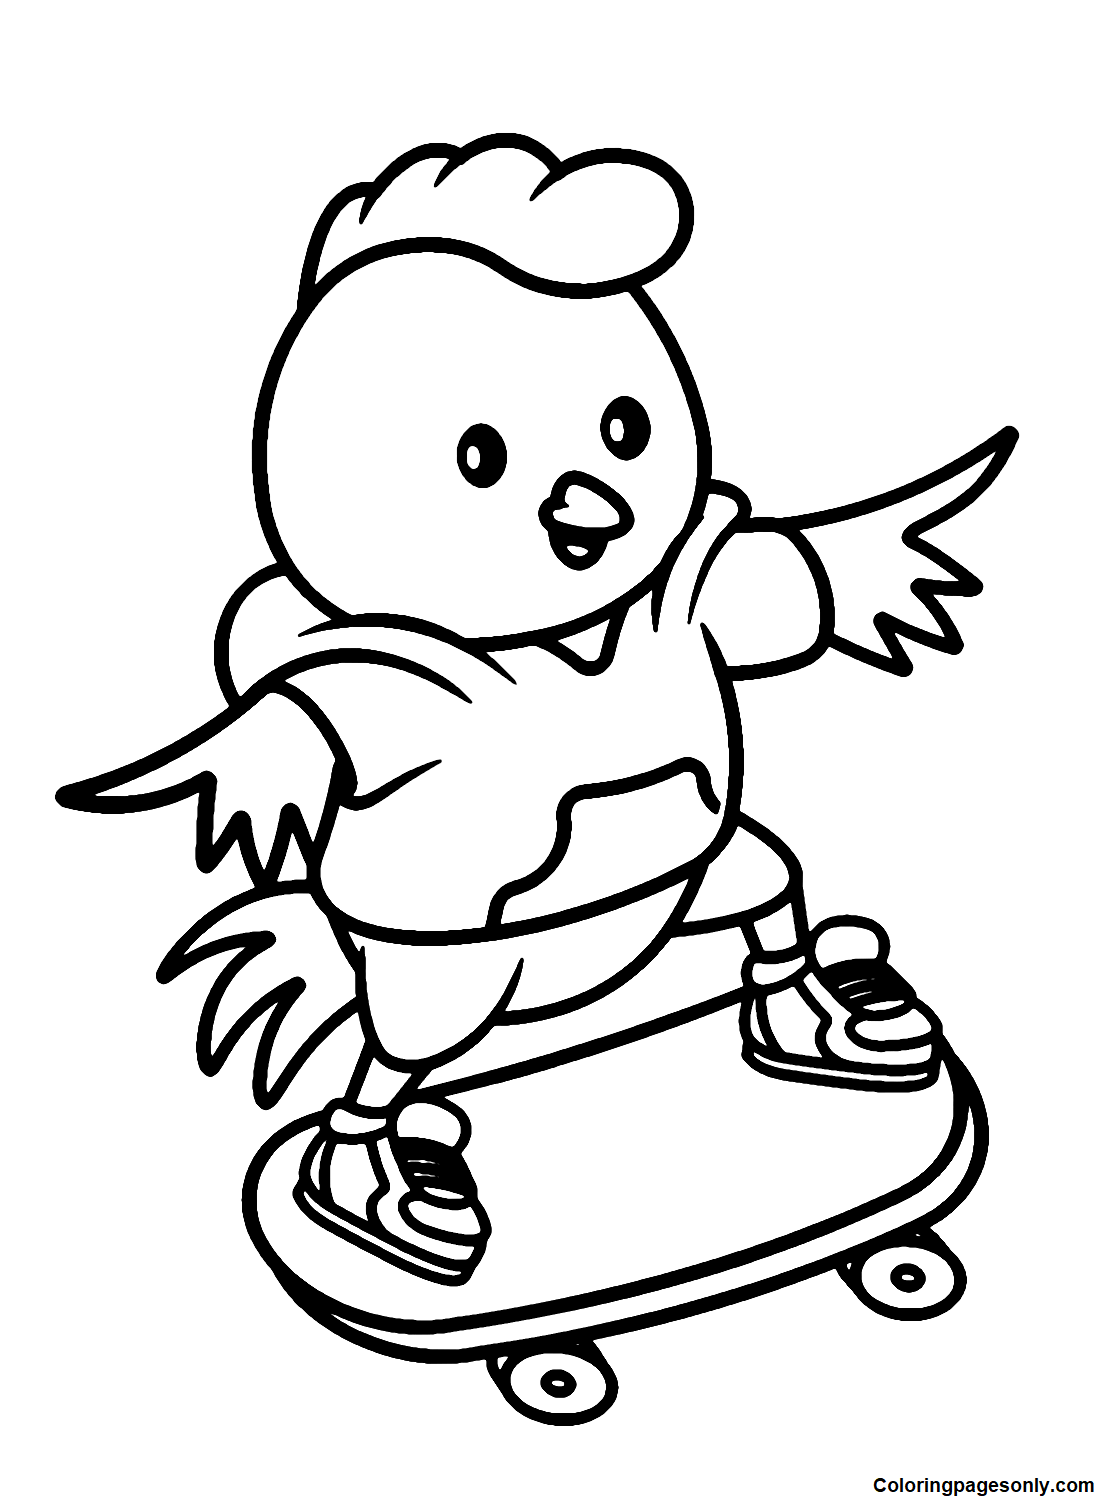 Chicken playing Skateboard Cartoon from Chick